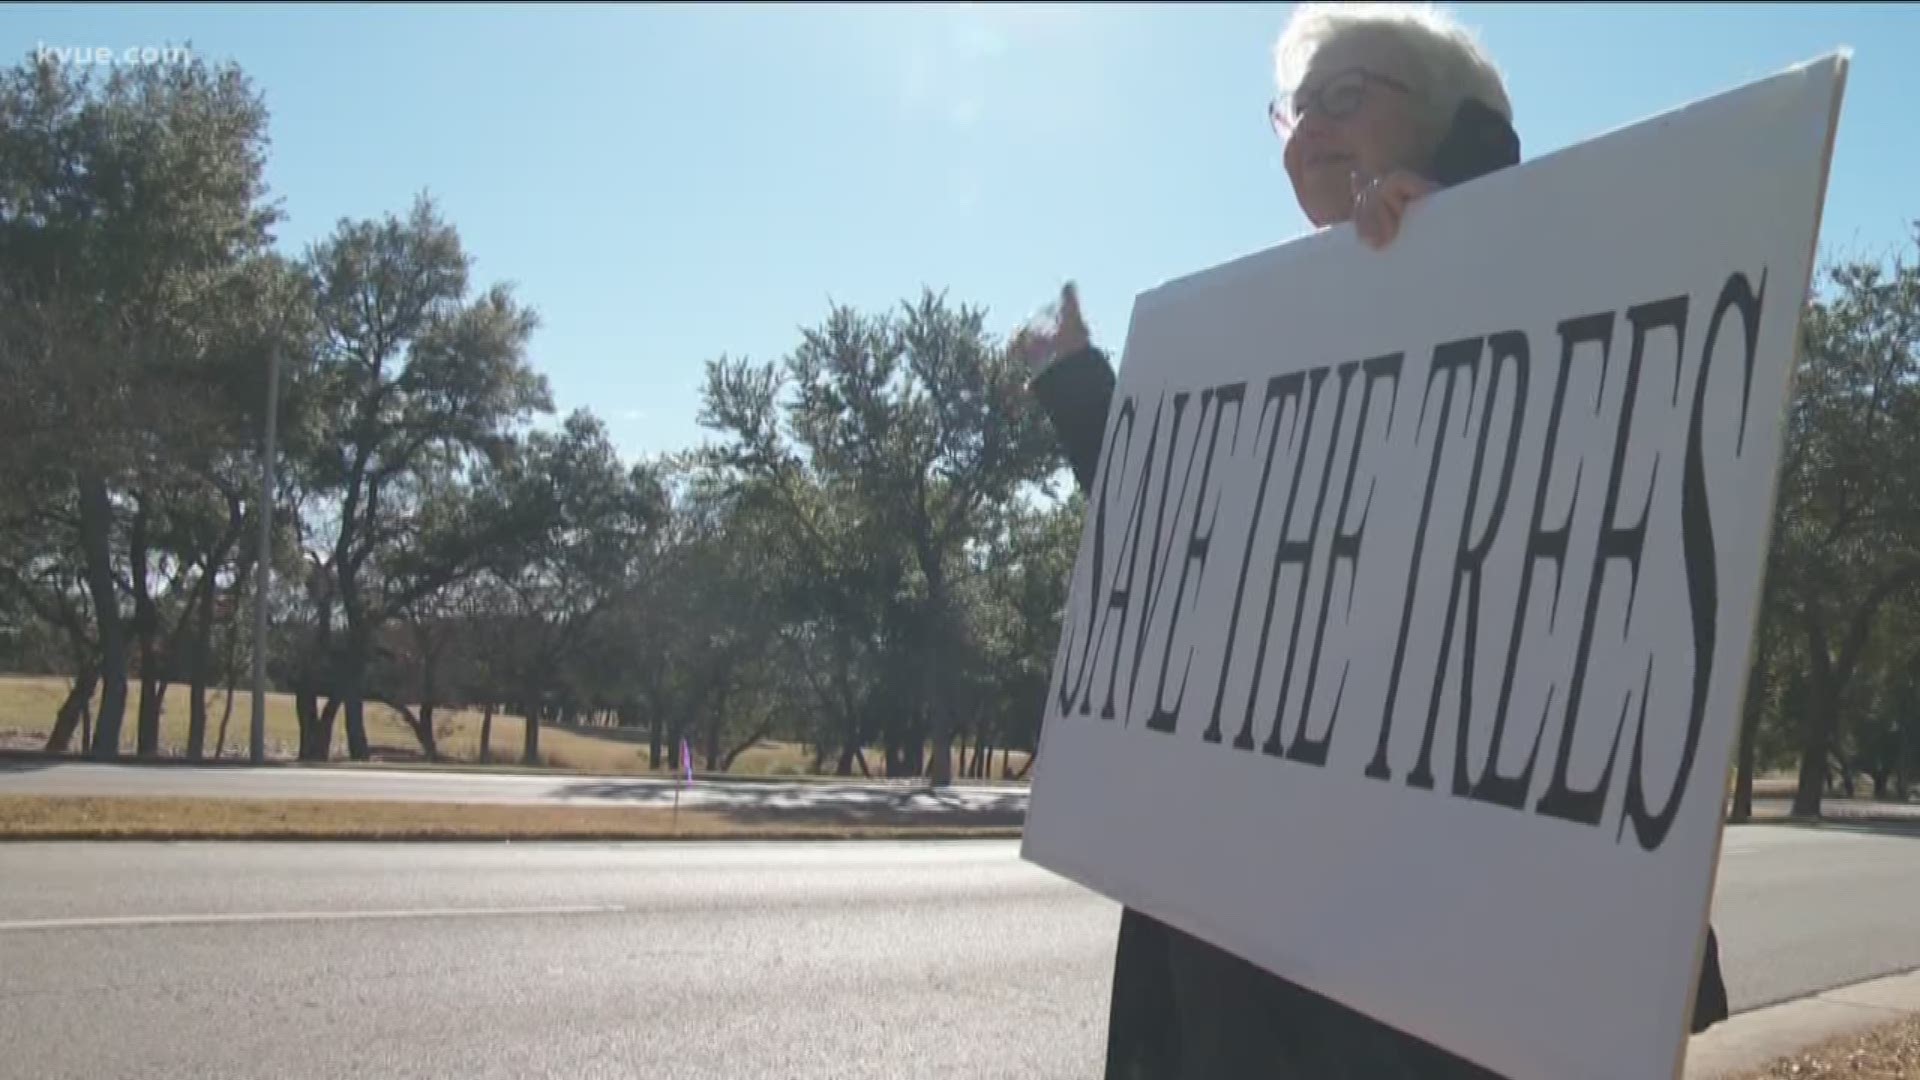 A Central Texas community's fight to save the trees paid off.